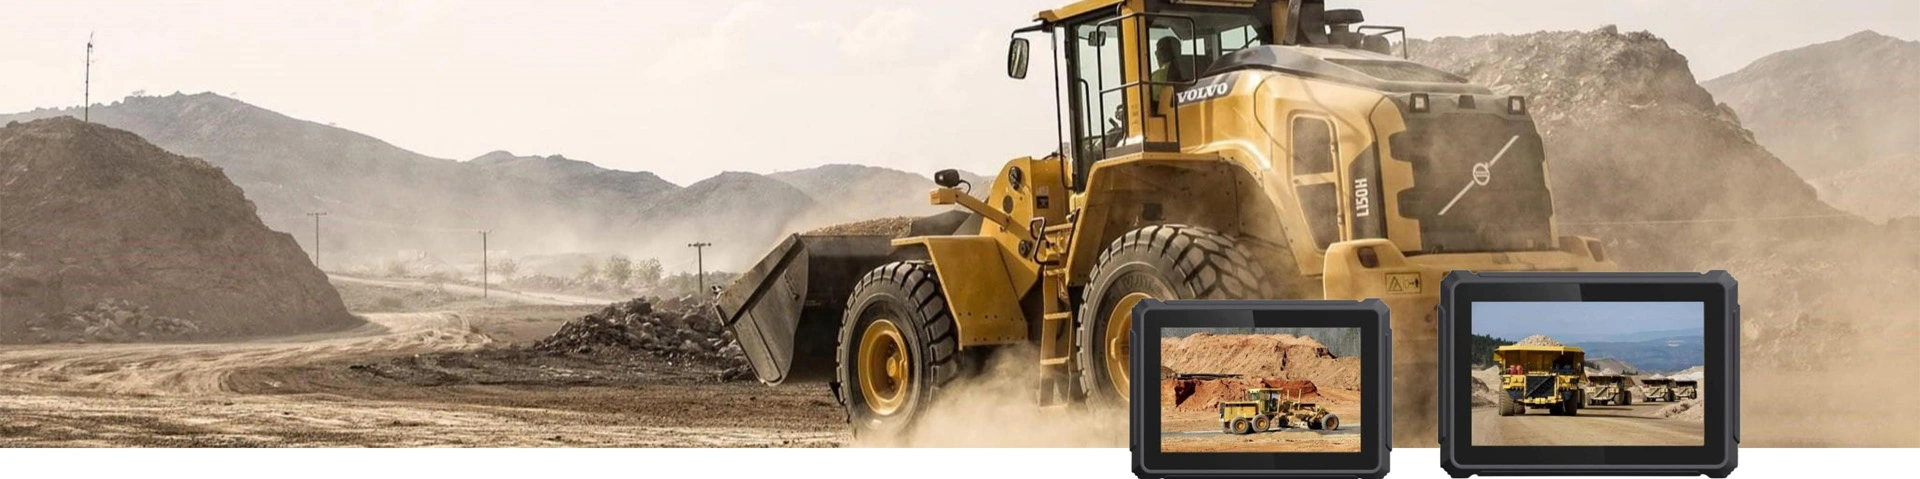 Vehicle Mount Computer Solutions in Construction & Mining